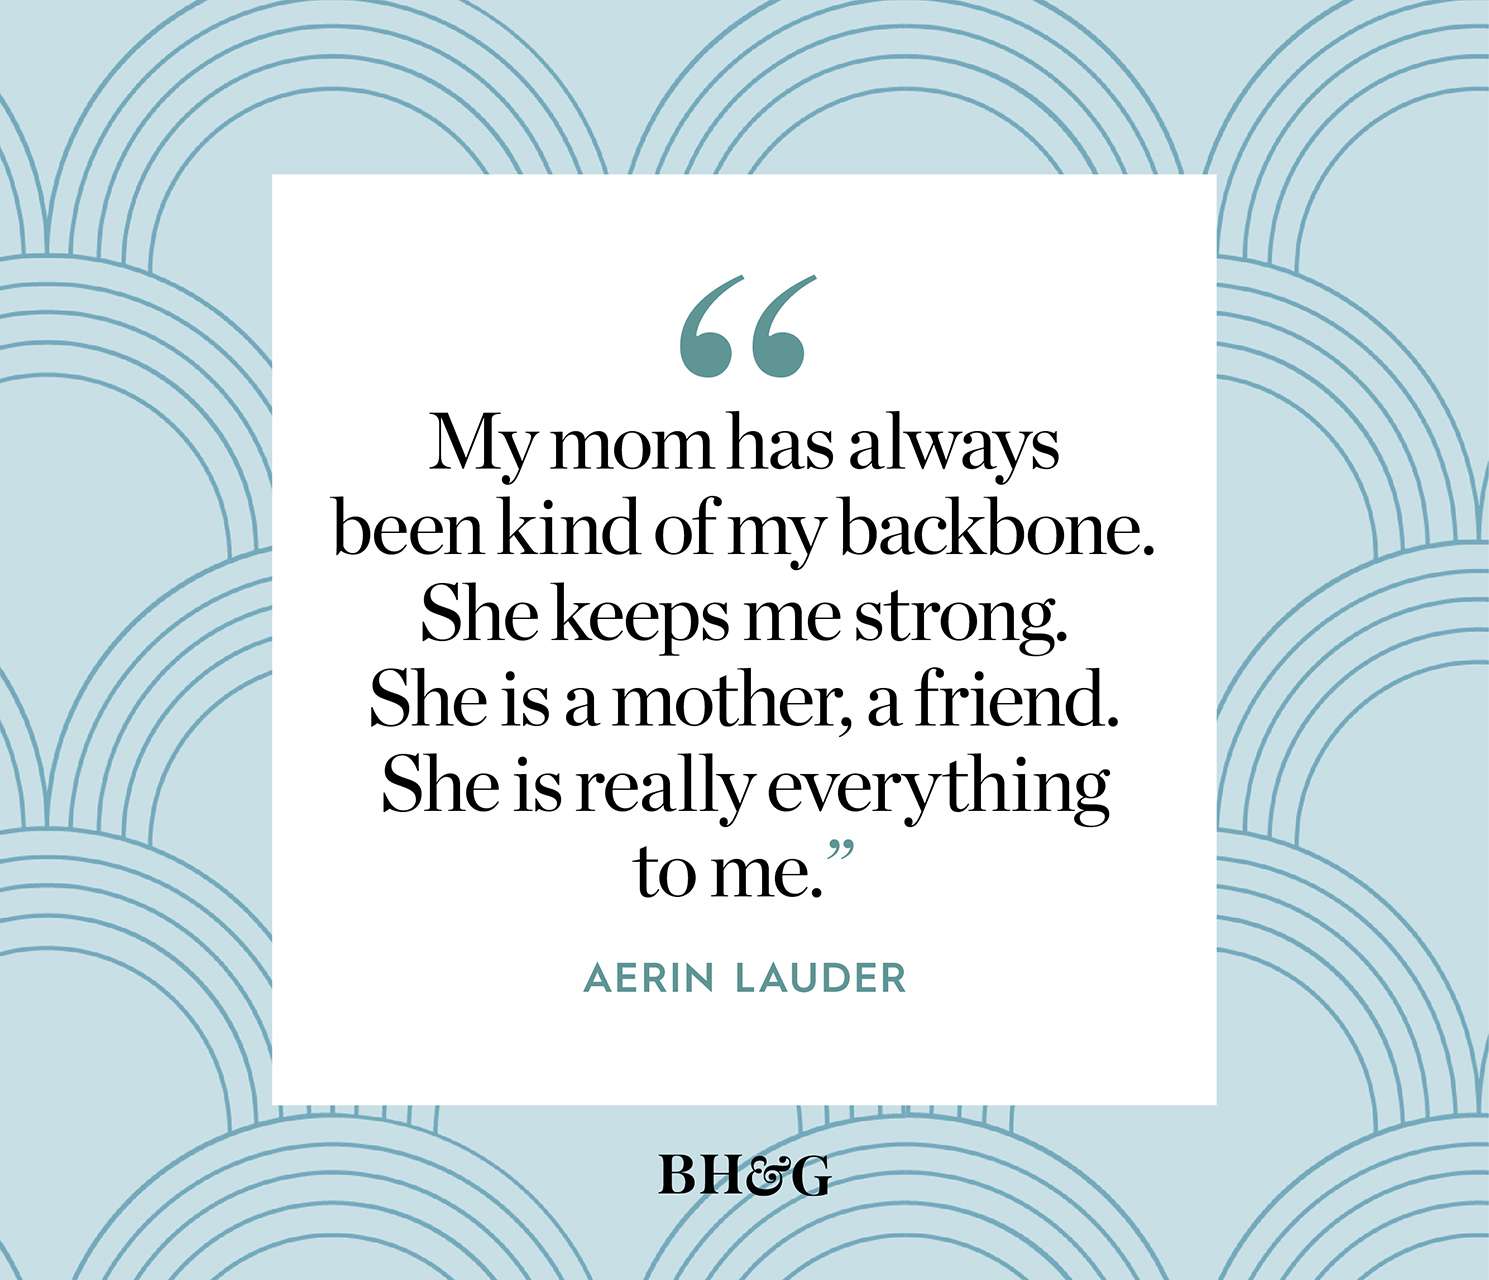 Mother sayings and quotes